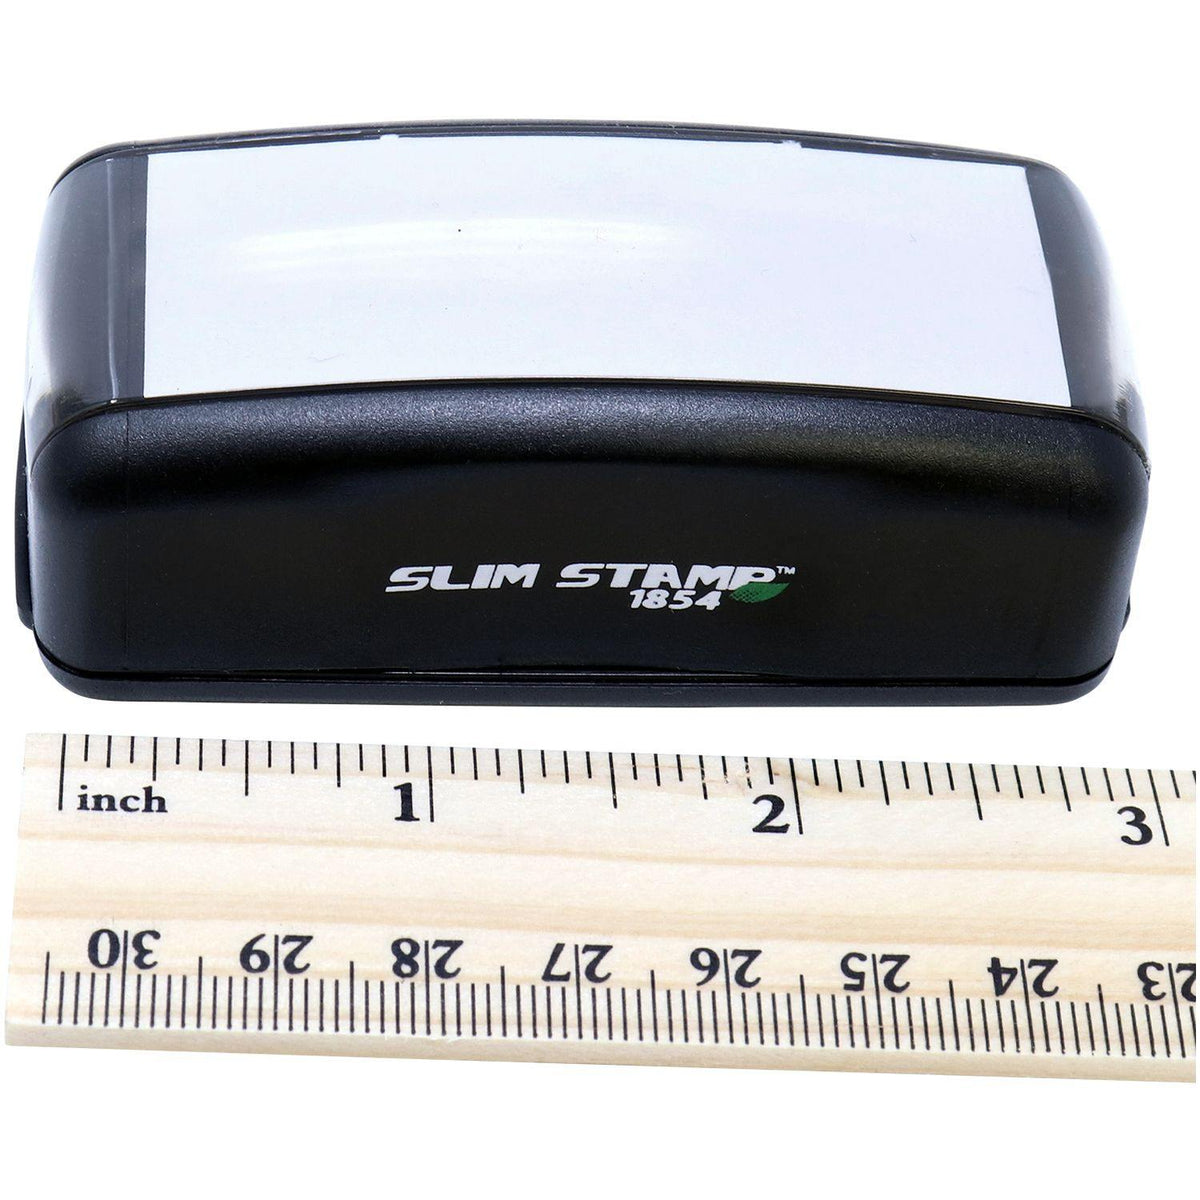 Measurement Large Pre-Inked Brilliant Stamp with Ruler